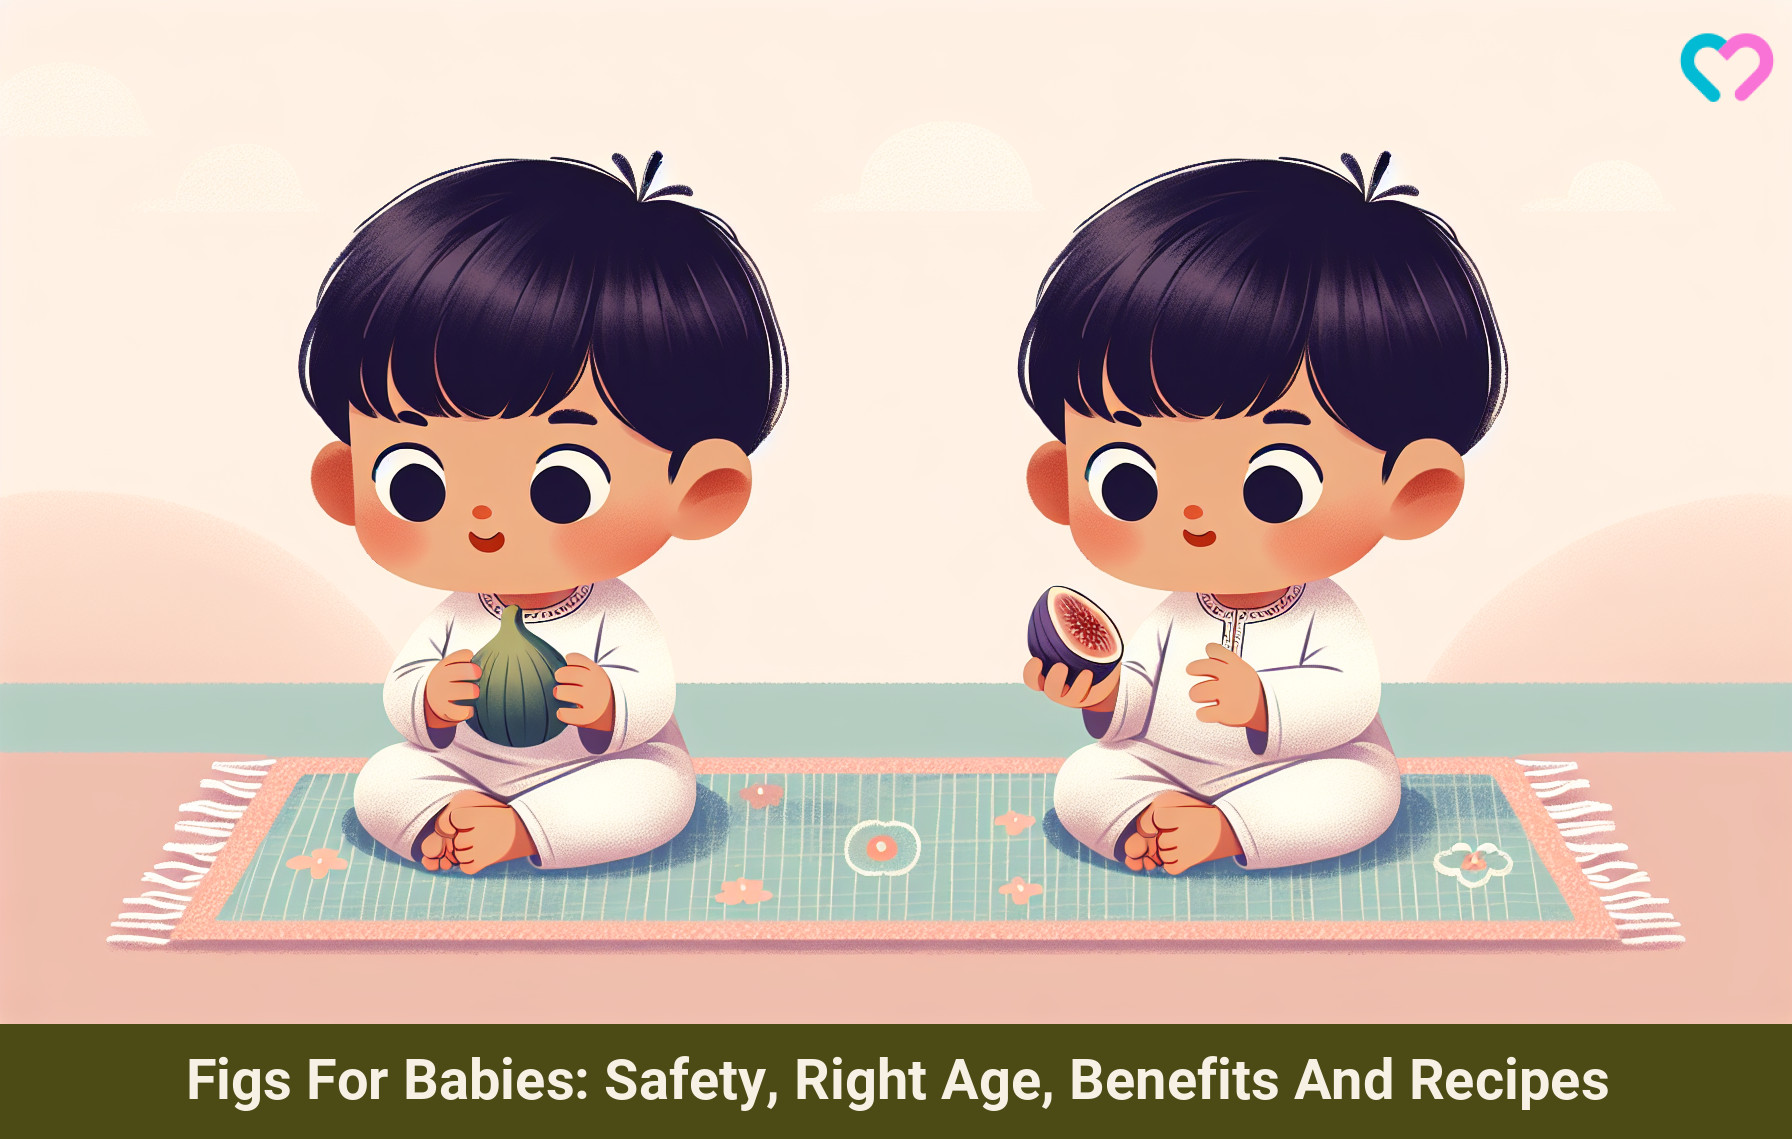 figs for babies_illustration